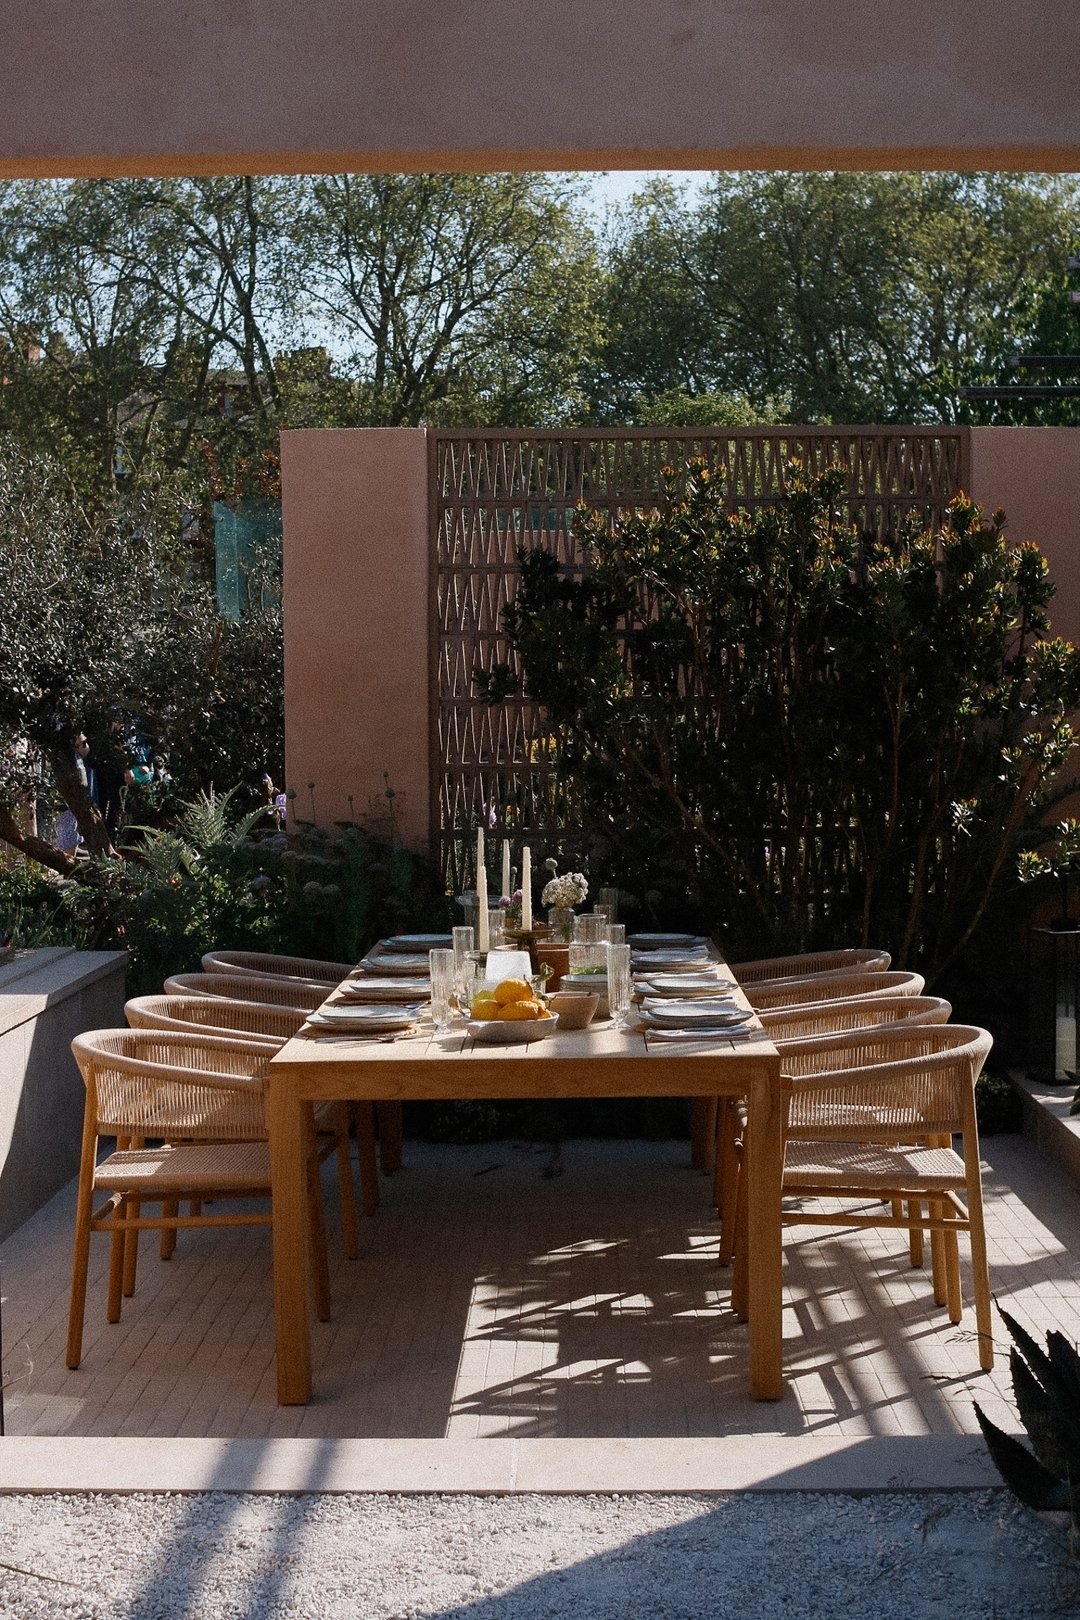 From last years @the_rhs Chelsea Flower show. We're still dreaming of this glorious outside dining set up - what new dreams will be unveiled at this years show? Not long to wait now!